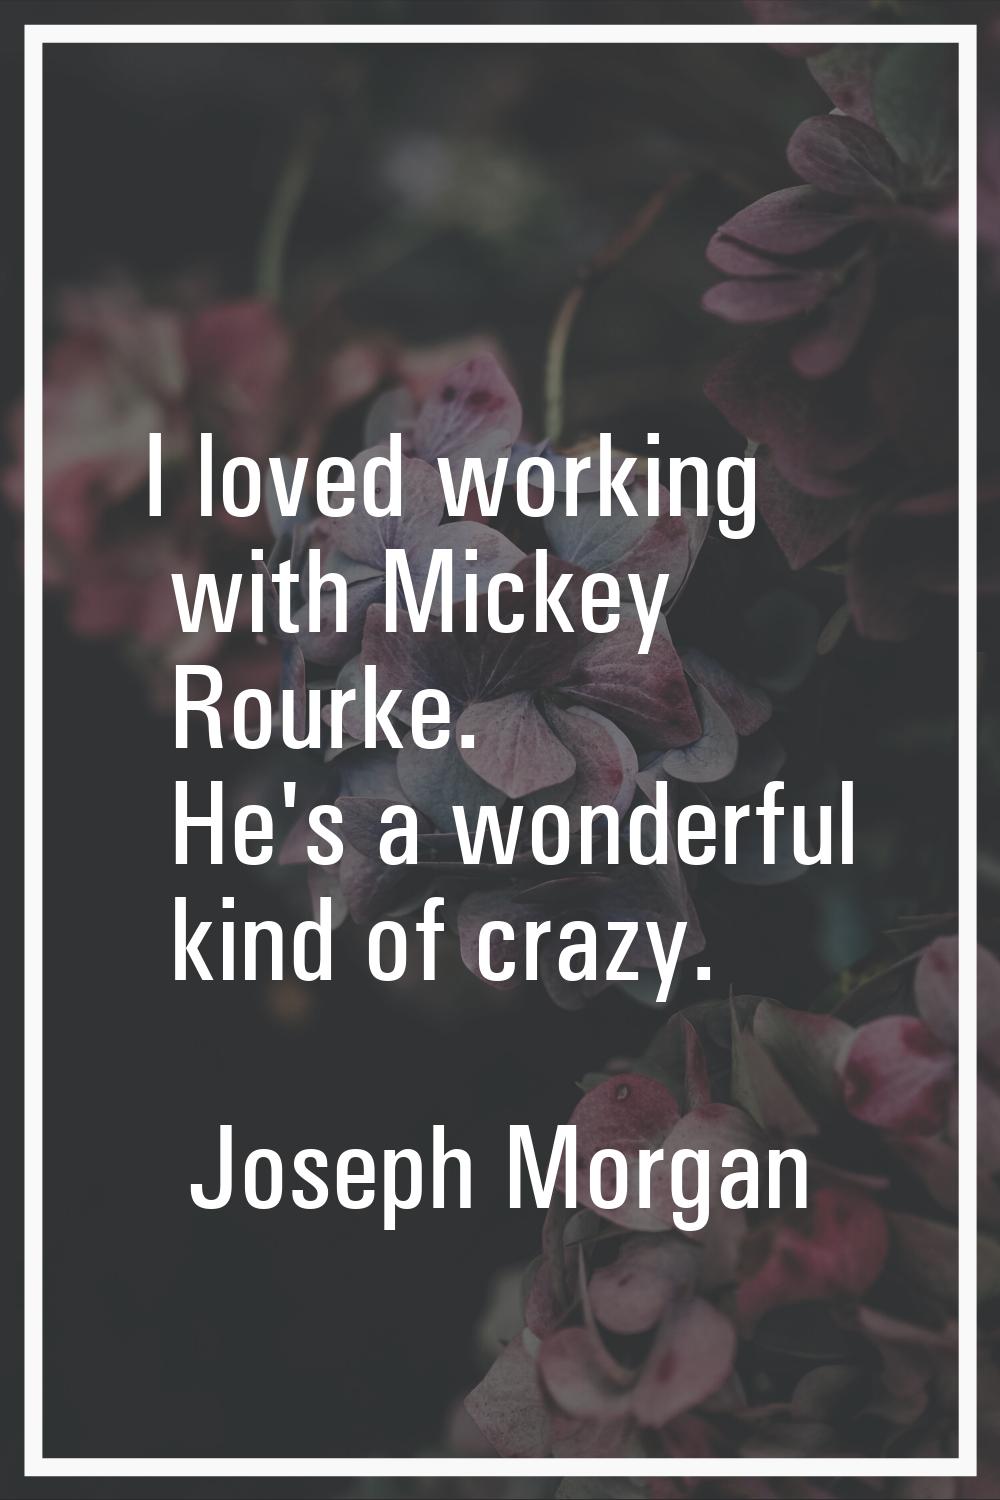 I loved working with Mickey Rourke. He's a wonderful kind of crazy.